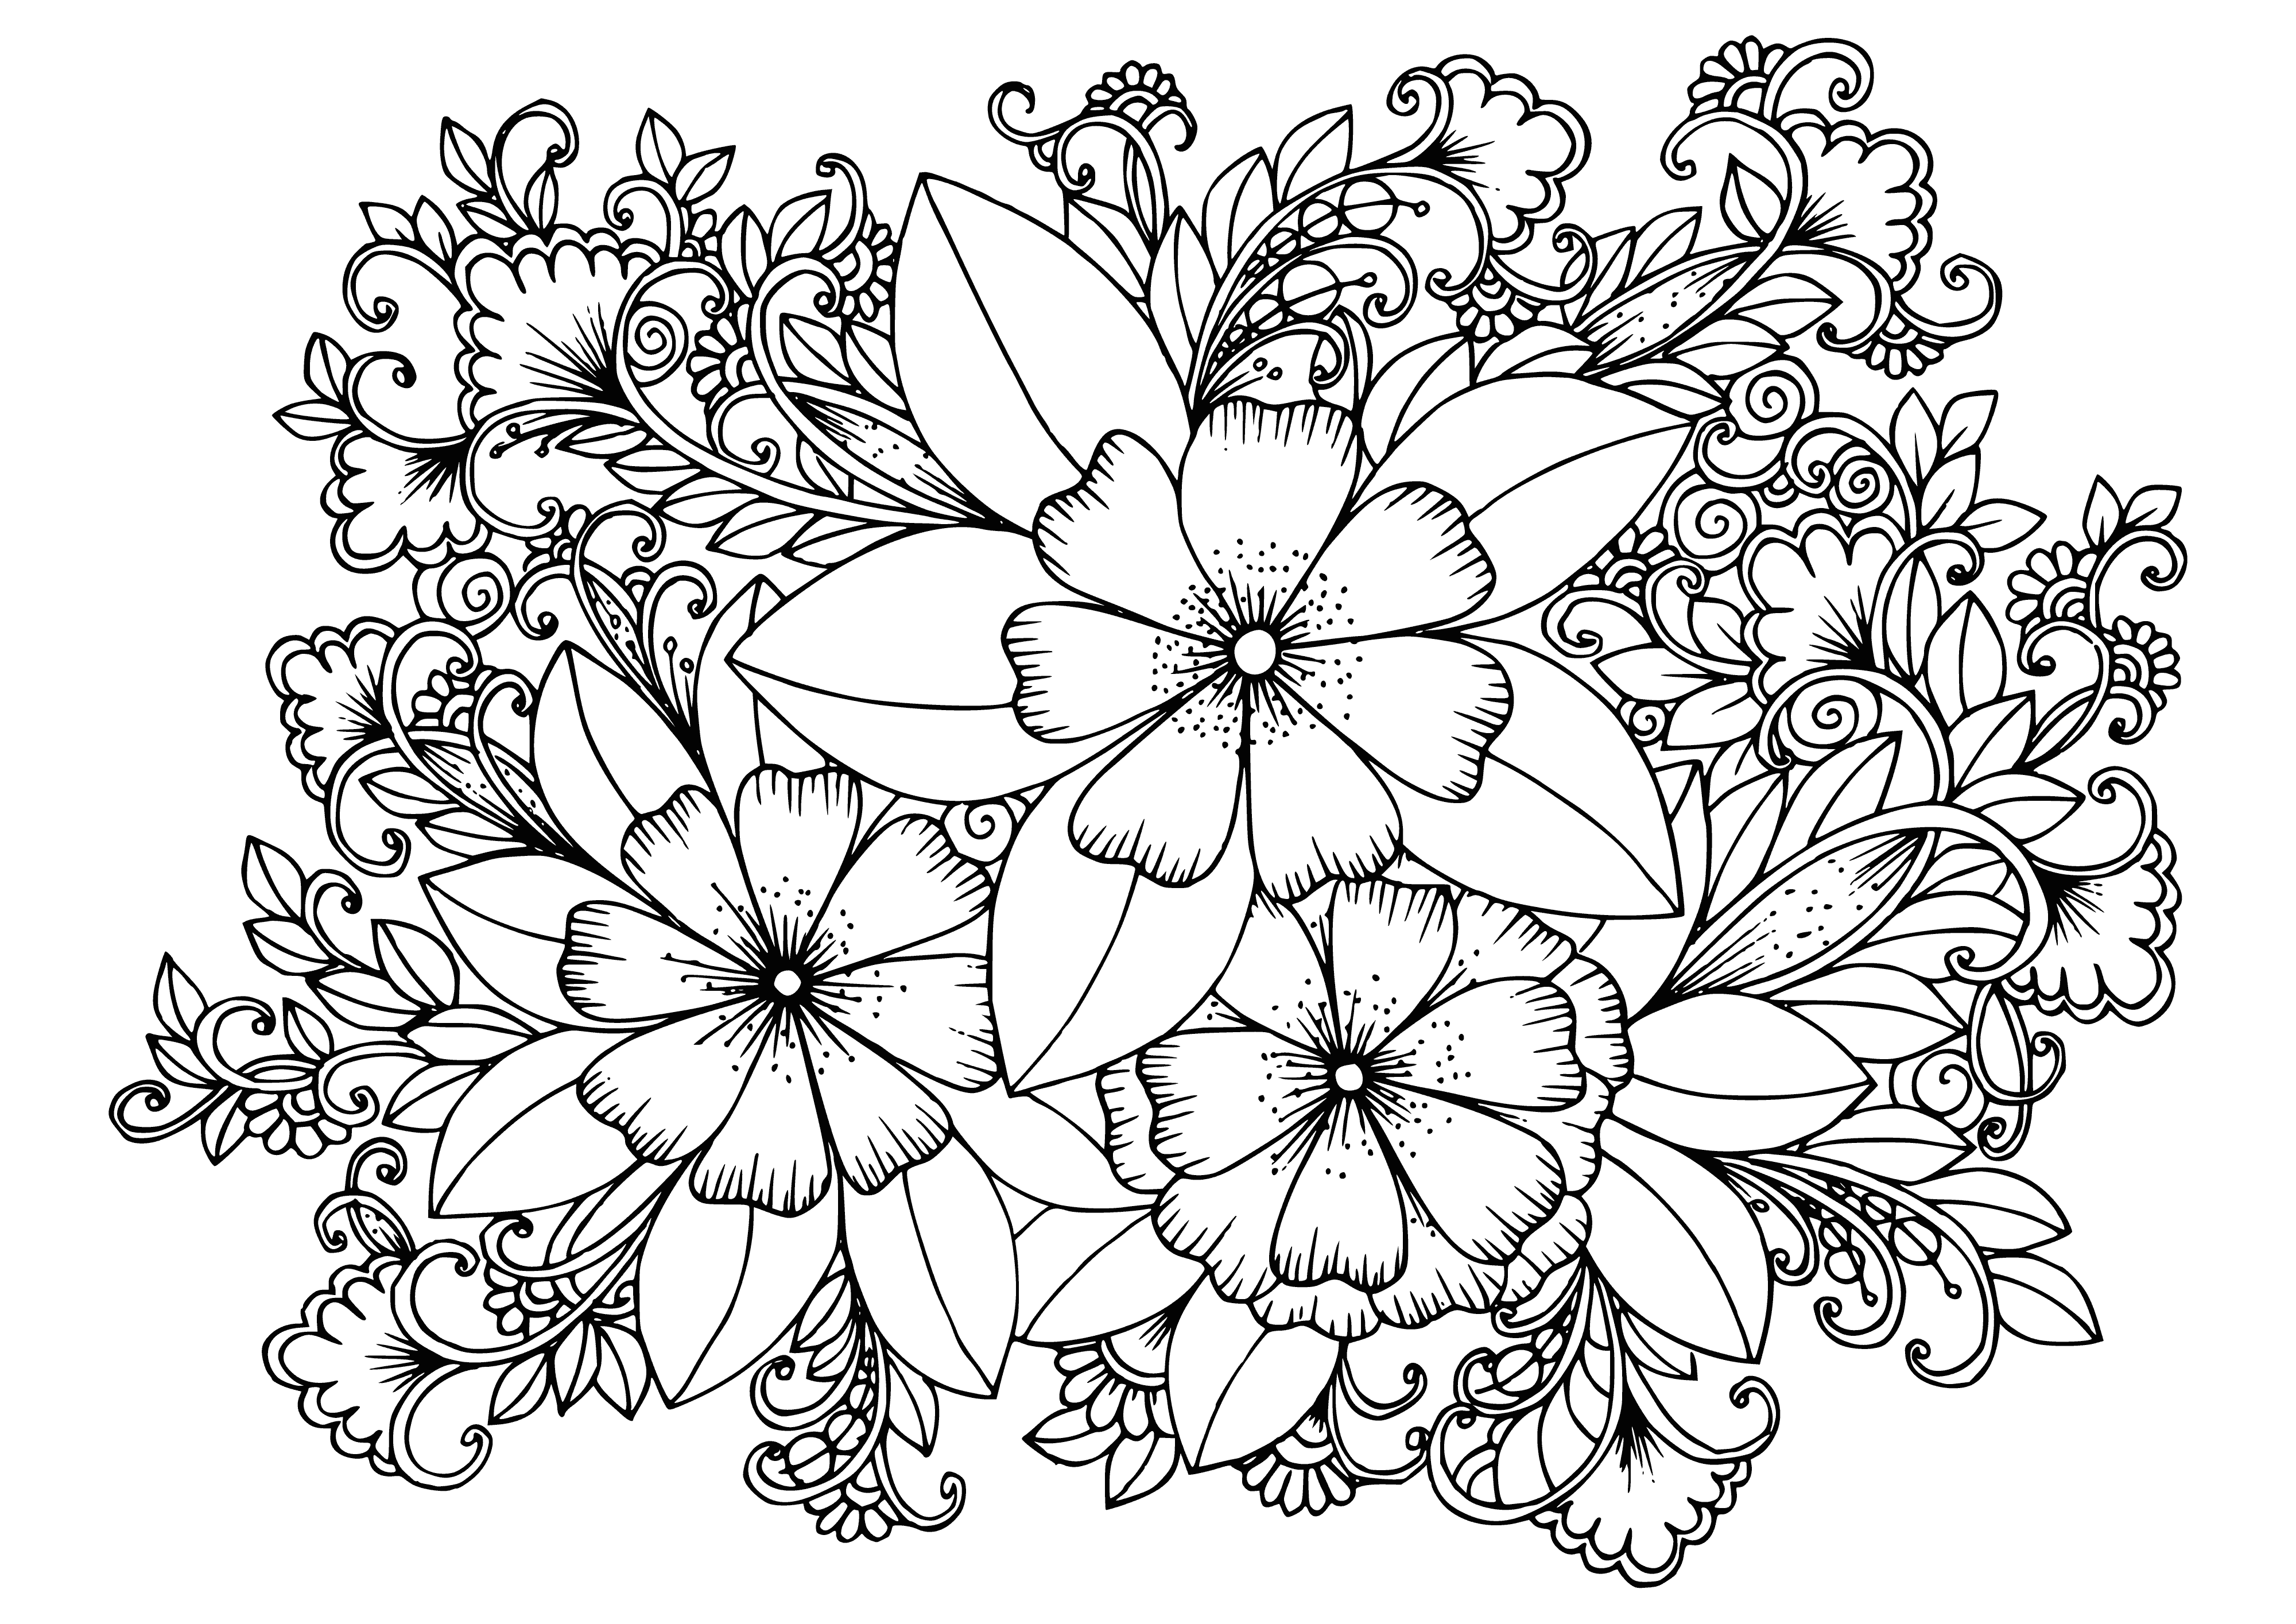 coloring page: 3 large flowers center of page, surrounded by small flowers & foliage. Blooming with bright colors & intricate patterns. Background gradient of blues & greens.